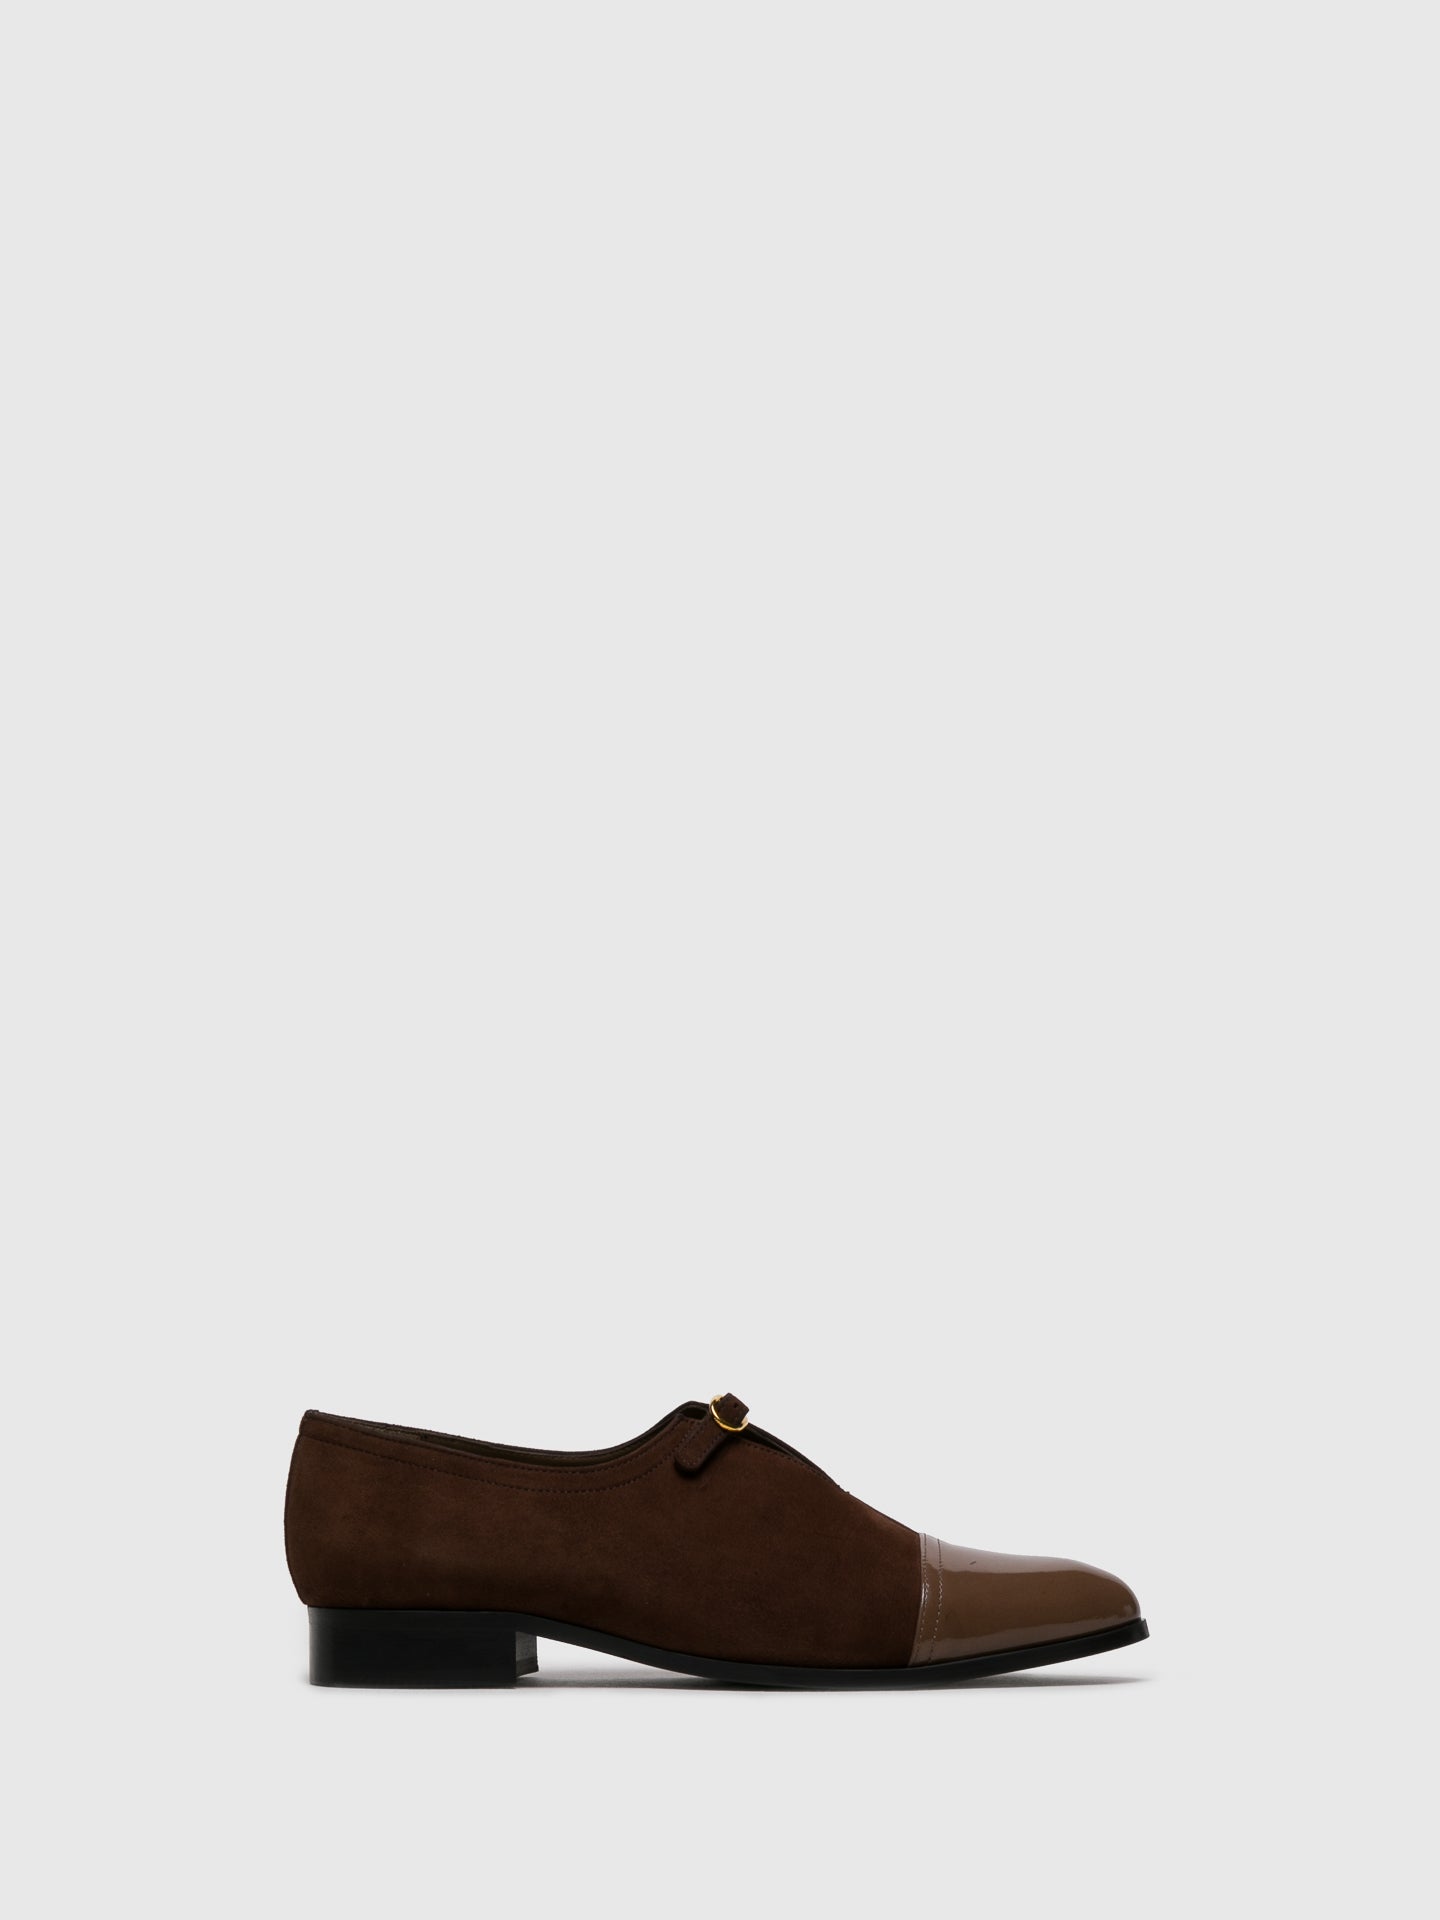 JJ Heitor Brown Buckle Loafers